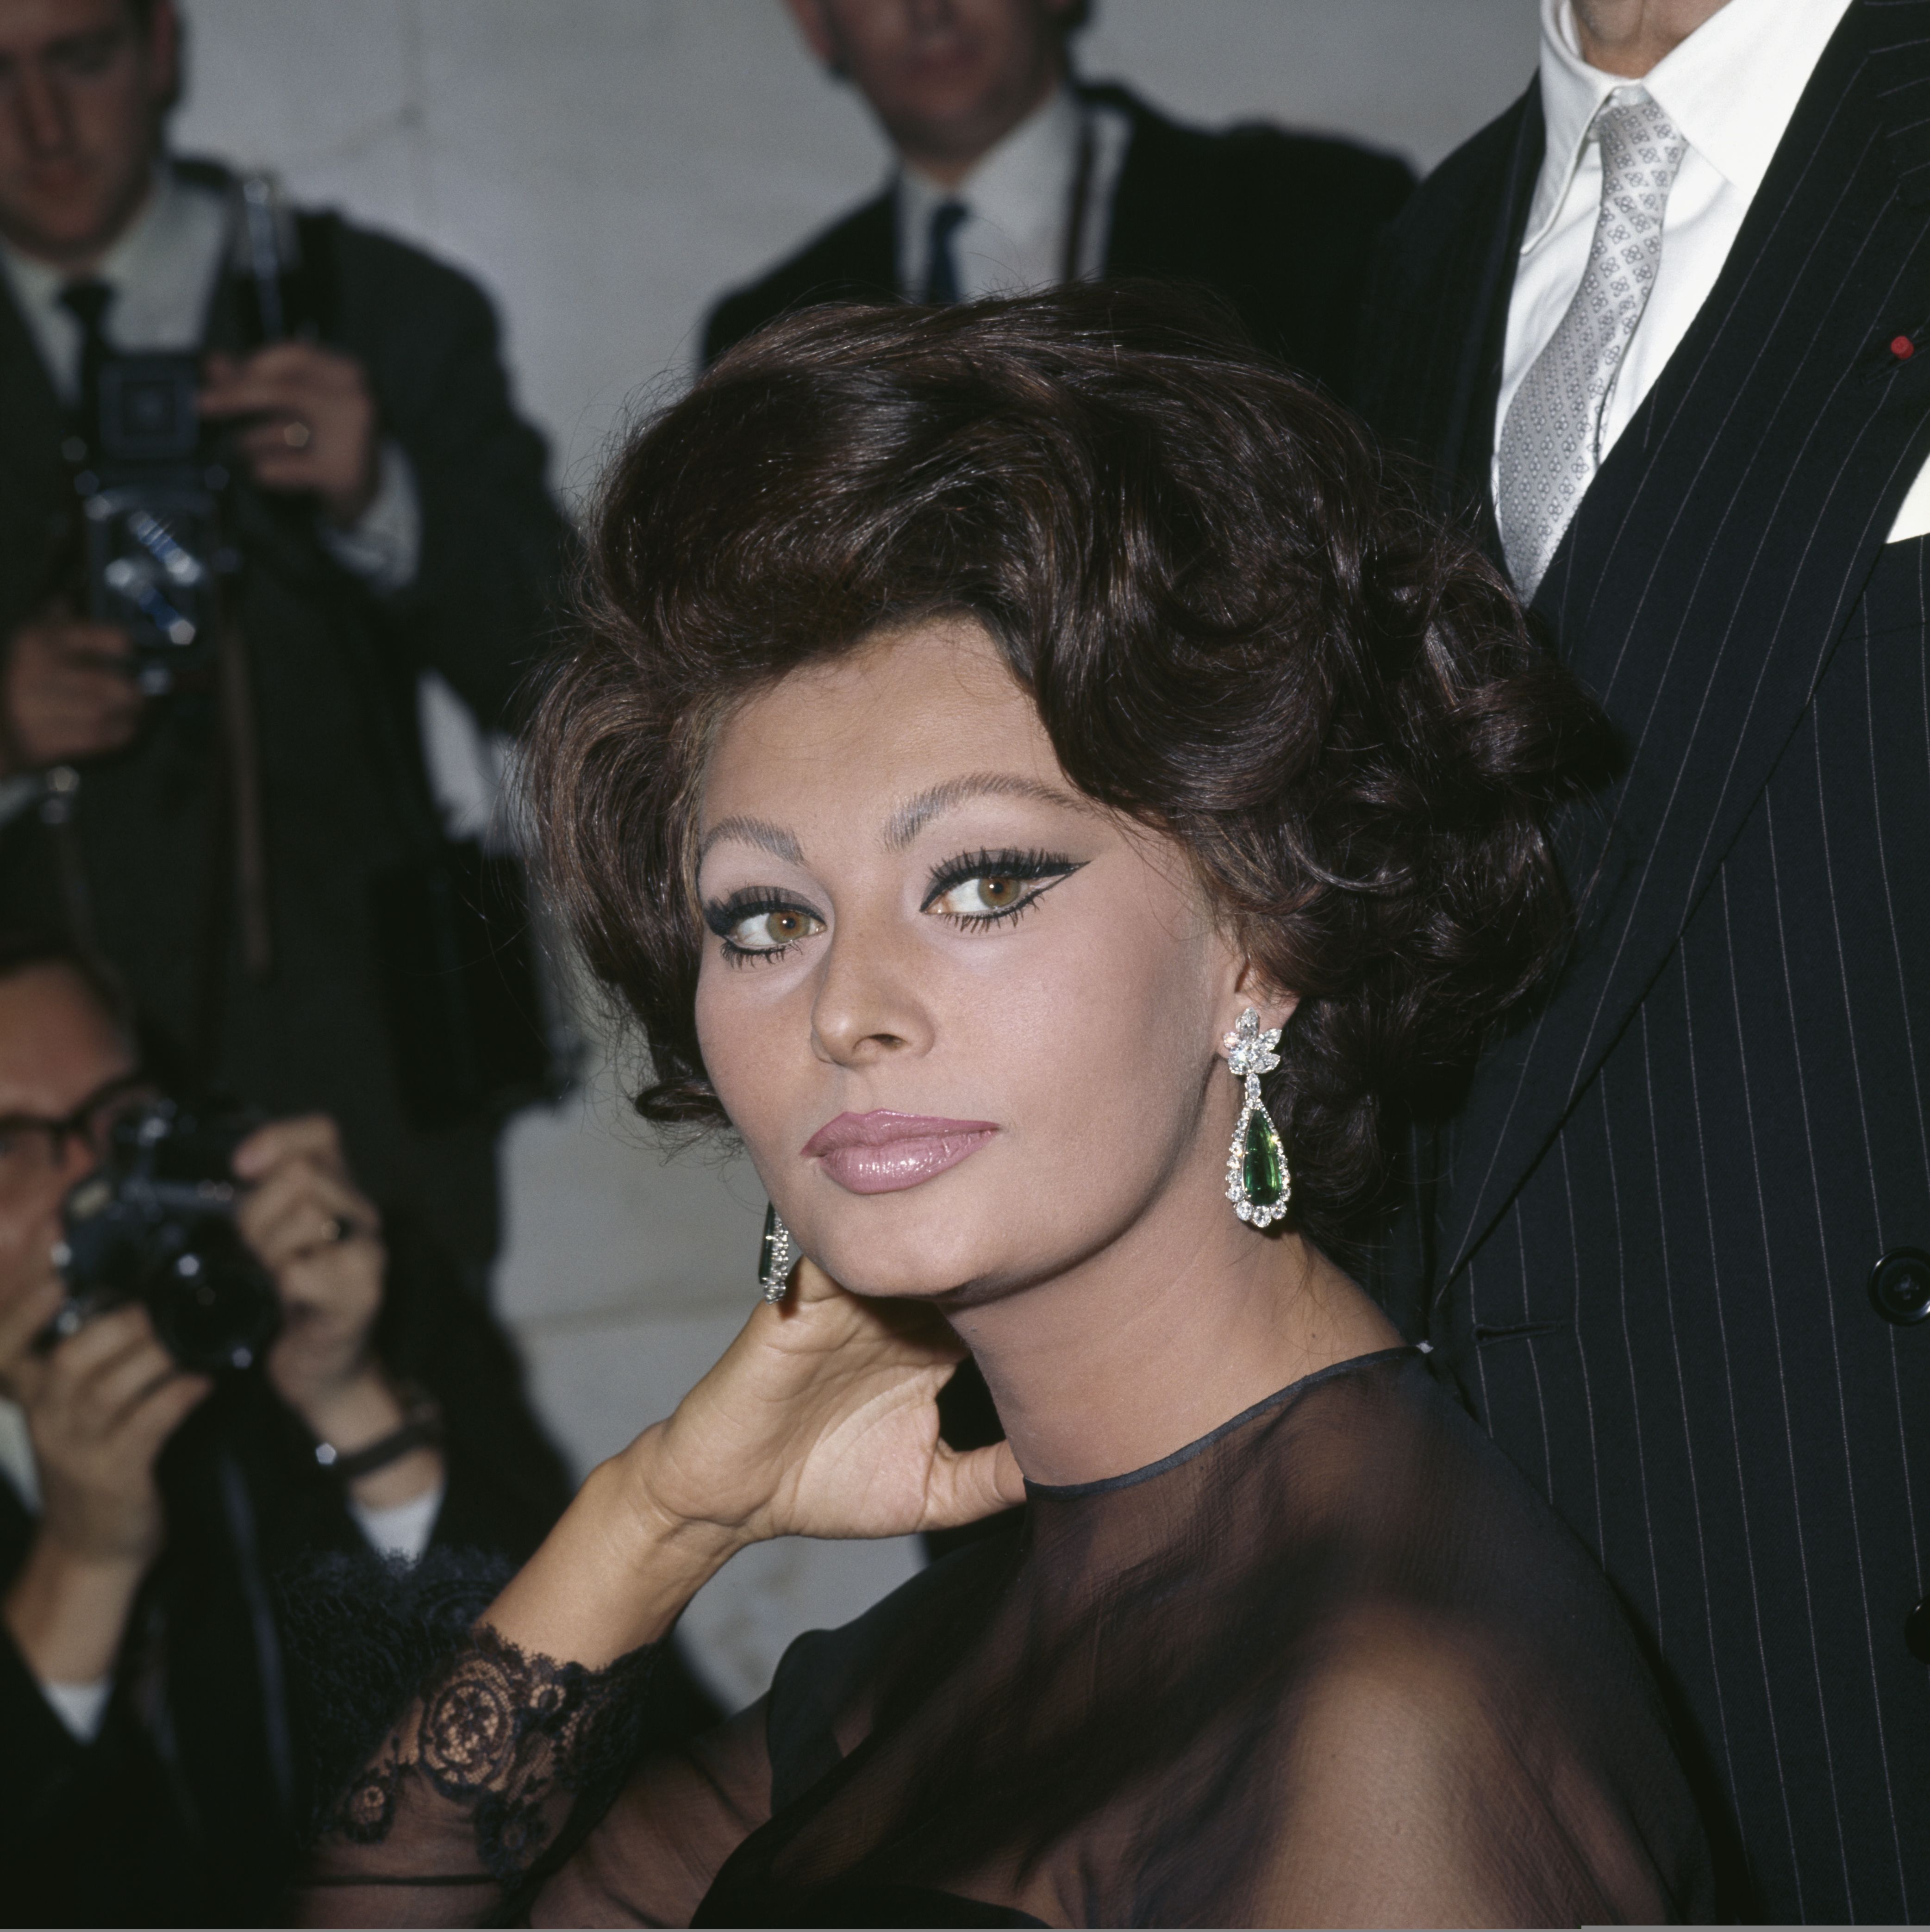 Sophia Loren poses for photographers at the Savoy Hotel, London in 1965 | Source: Getty Images